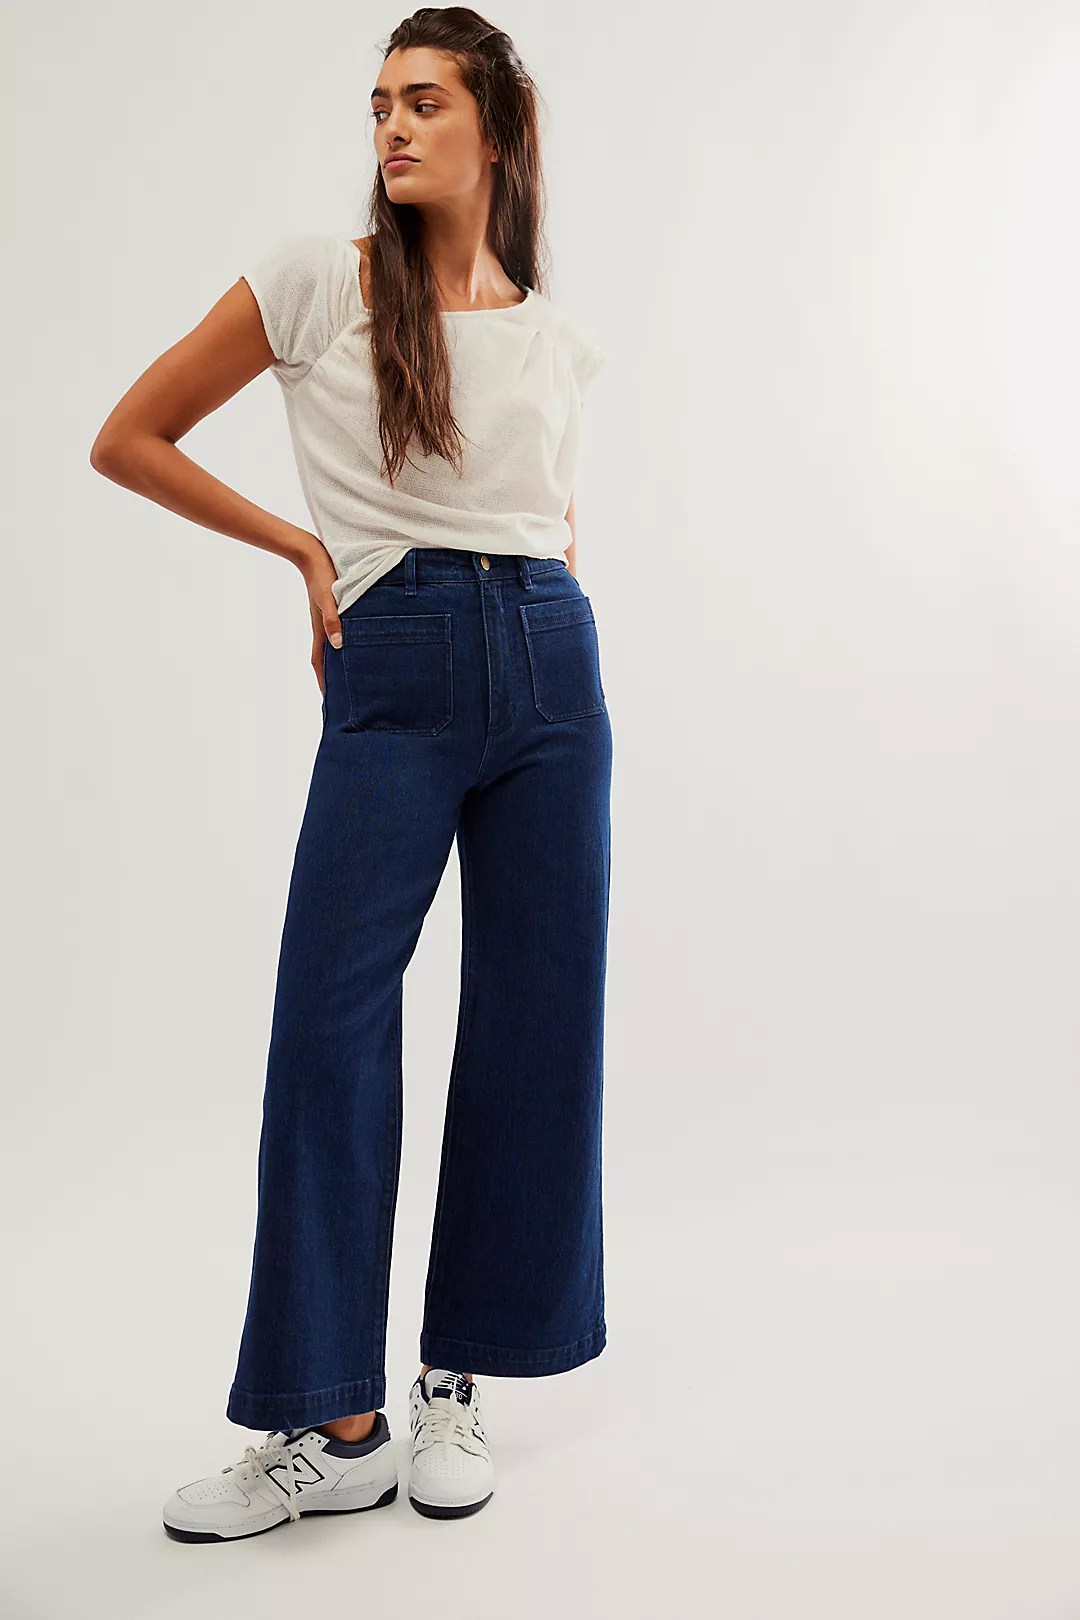 Wearable Trends: High Waist Sailor Pants For The Holidays 